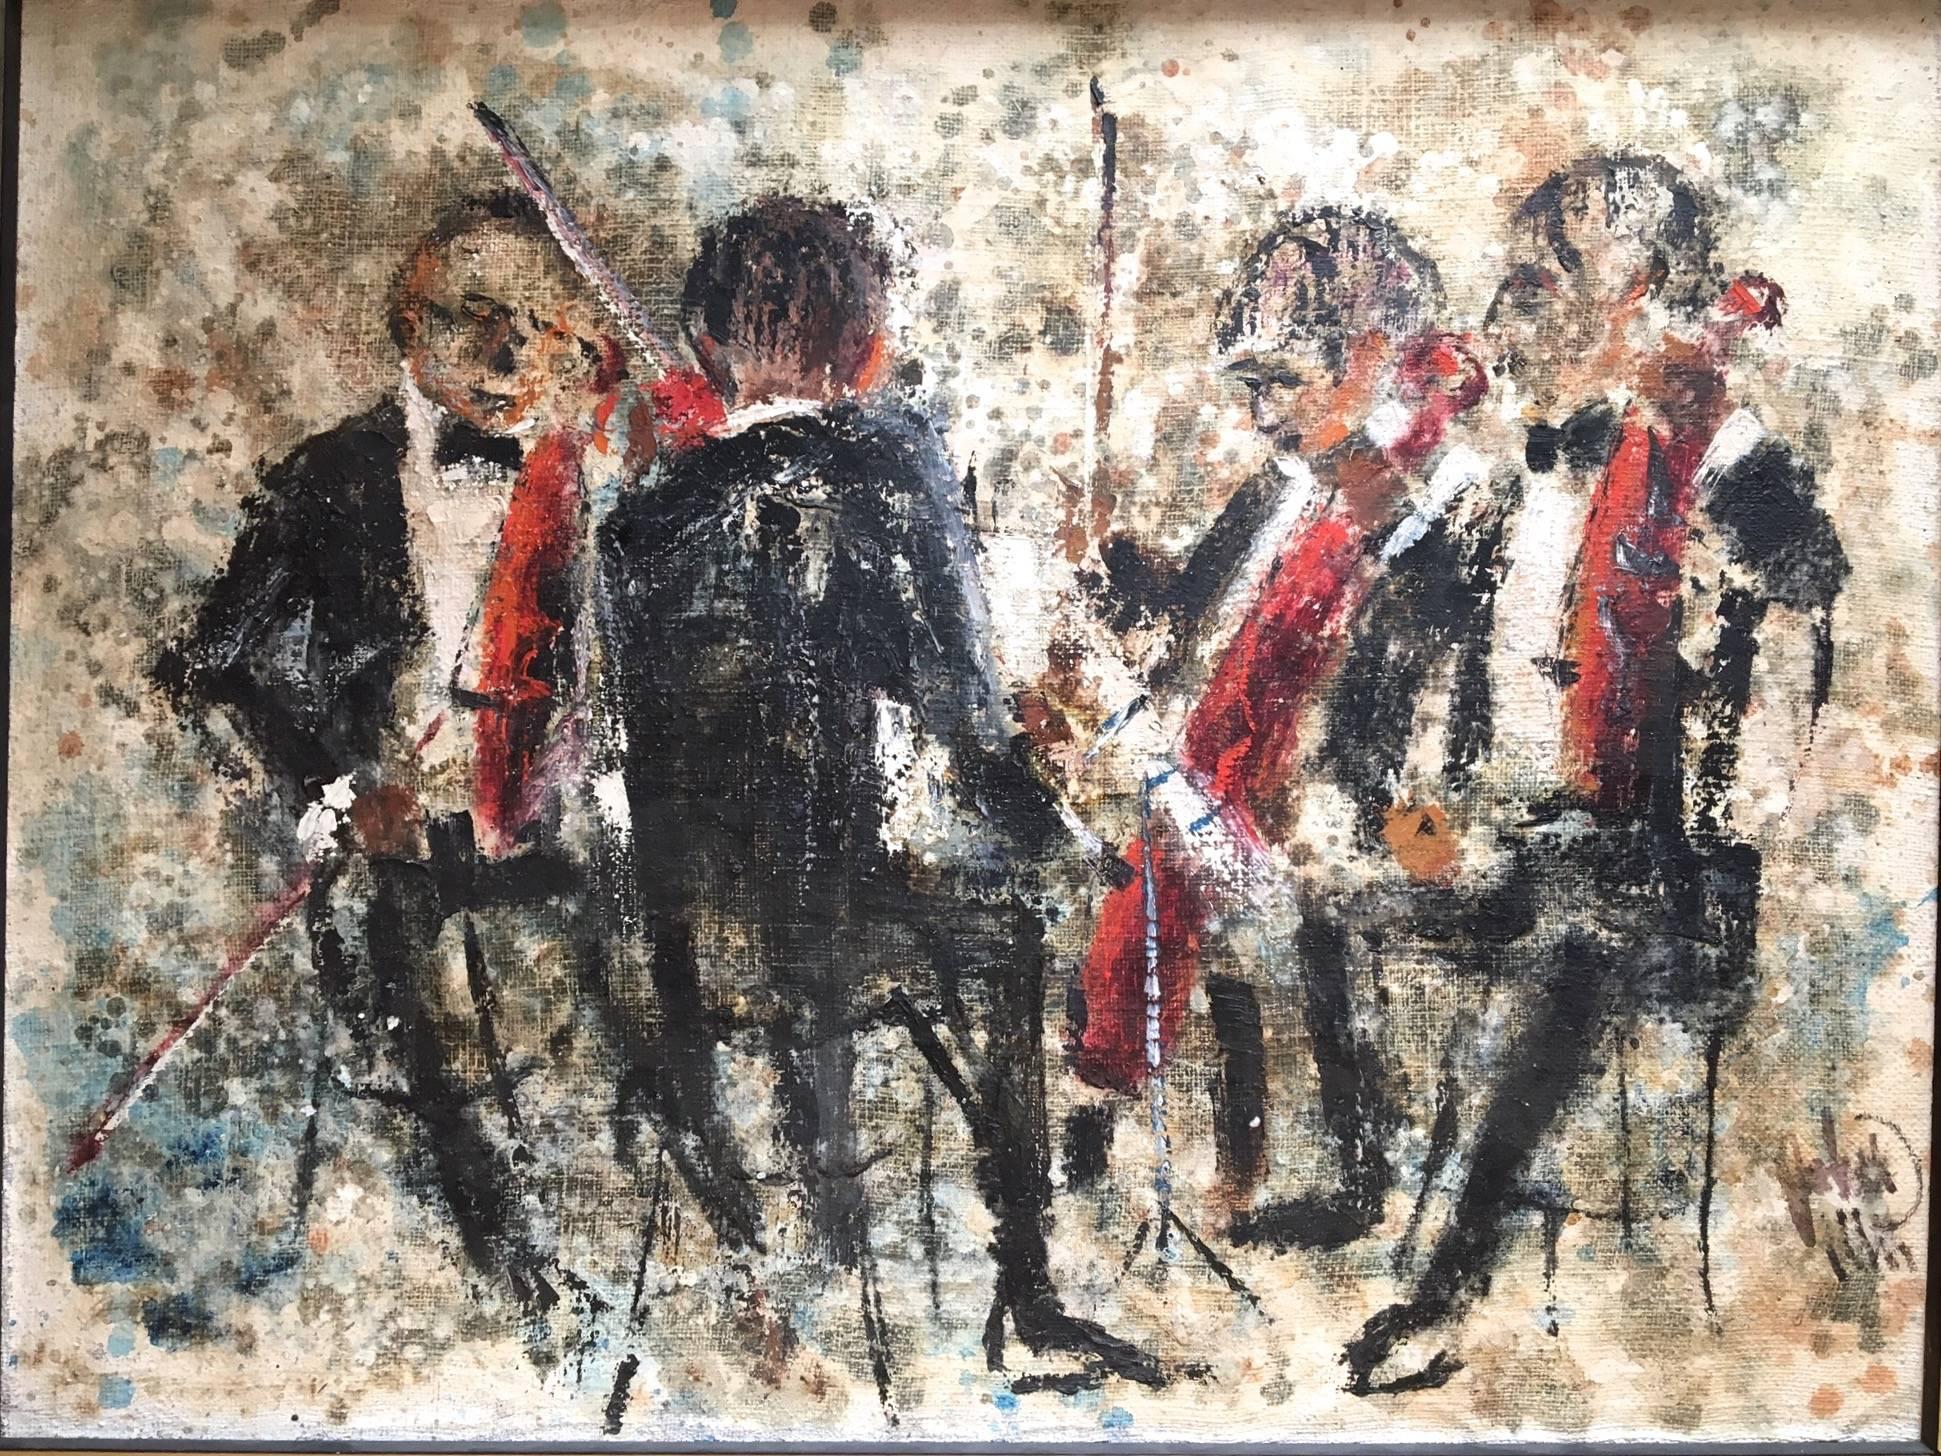 Unknown Figurative Painting - Group of Musicians Playing Violin